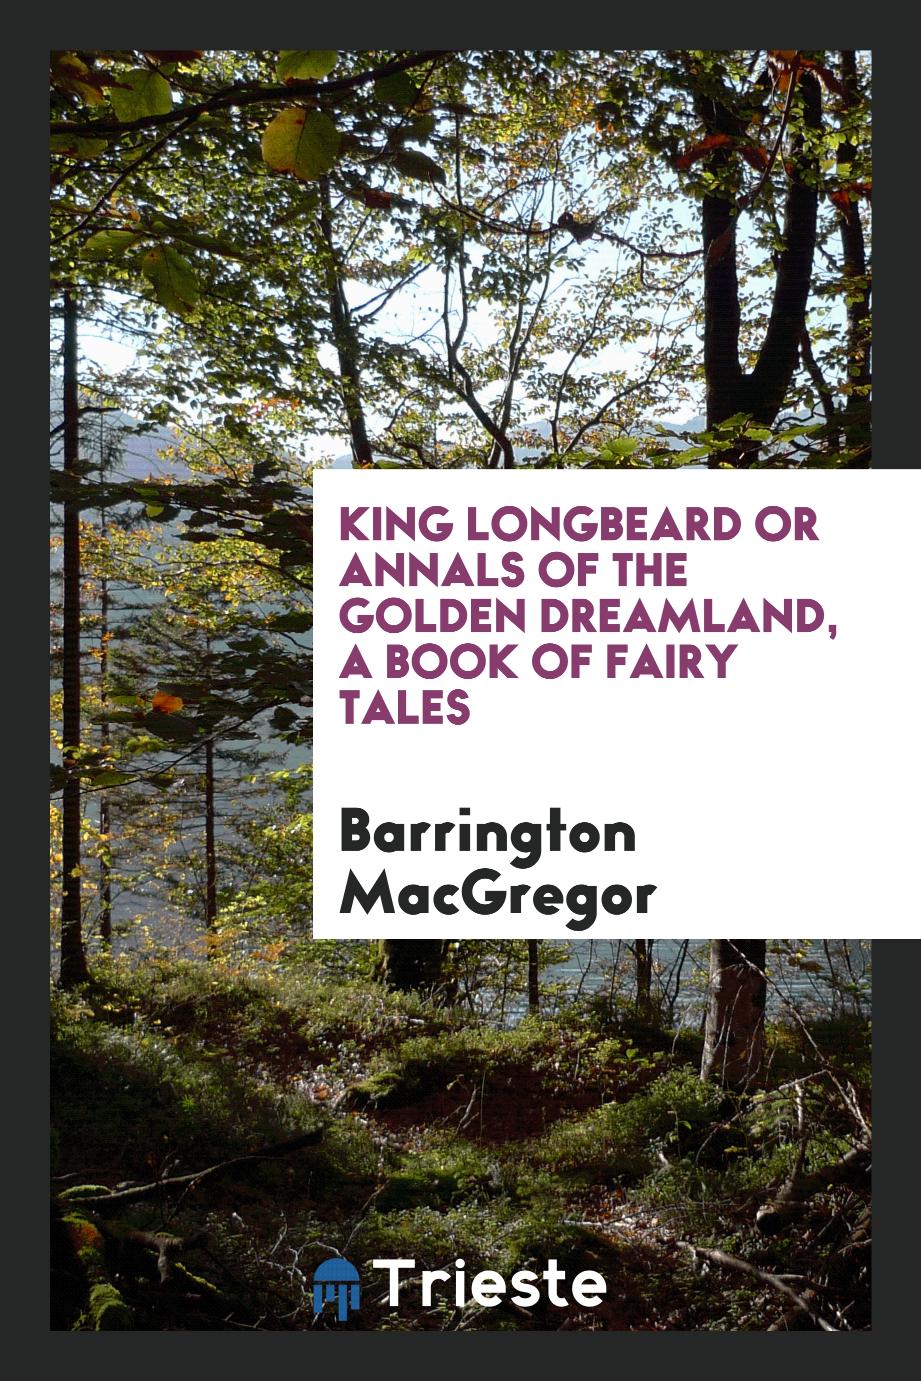 King Longbeard or annals of the golden dreamland, a book of fairy tales